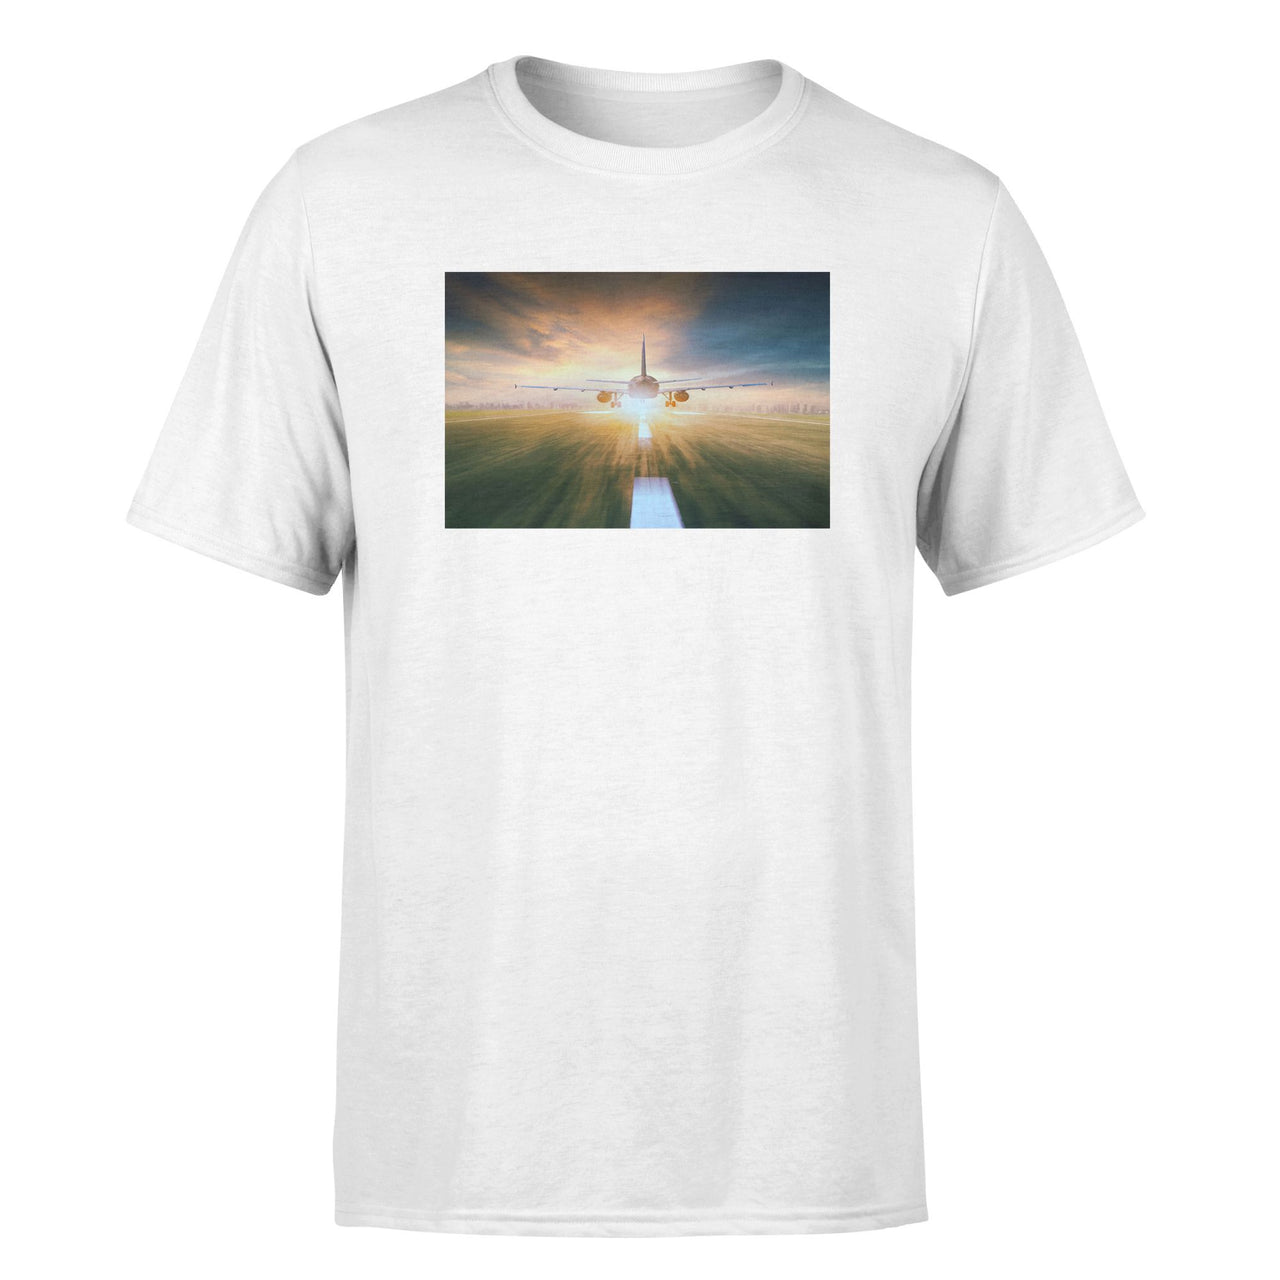 Airplane Flying Over Runway Designed T-Shirts